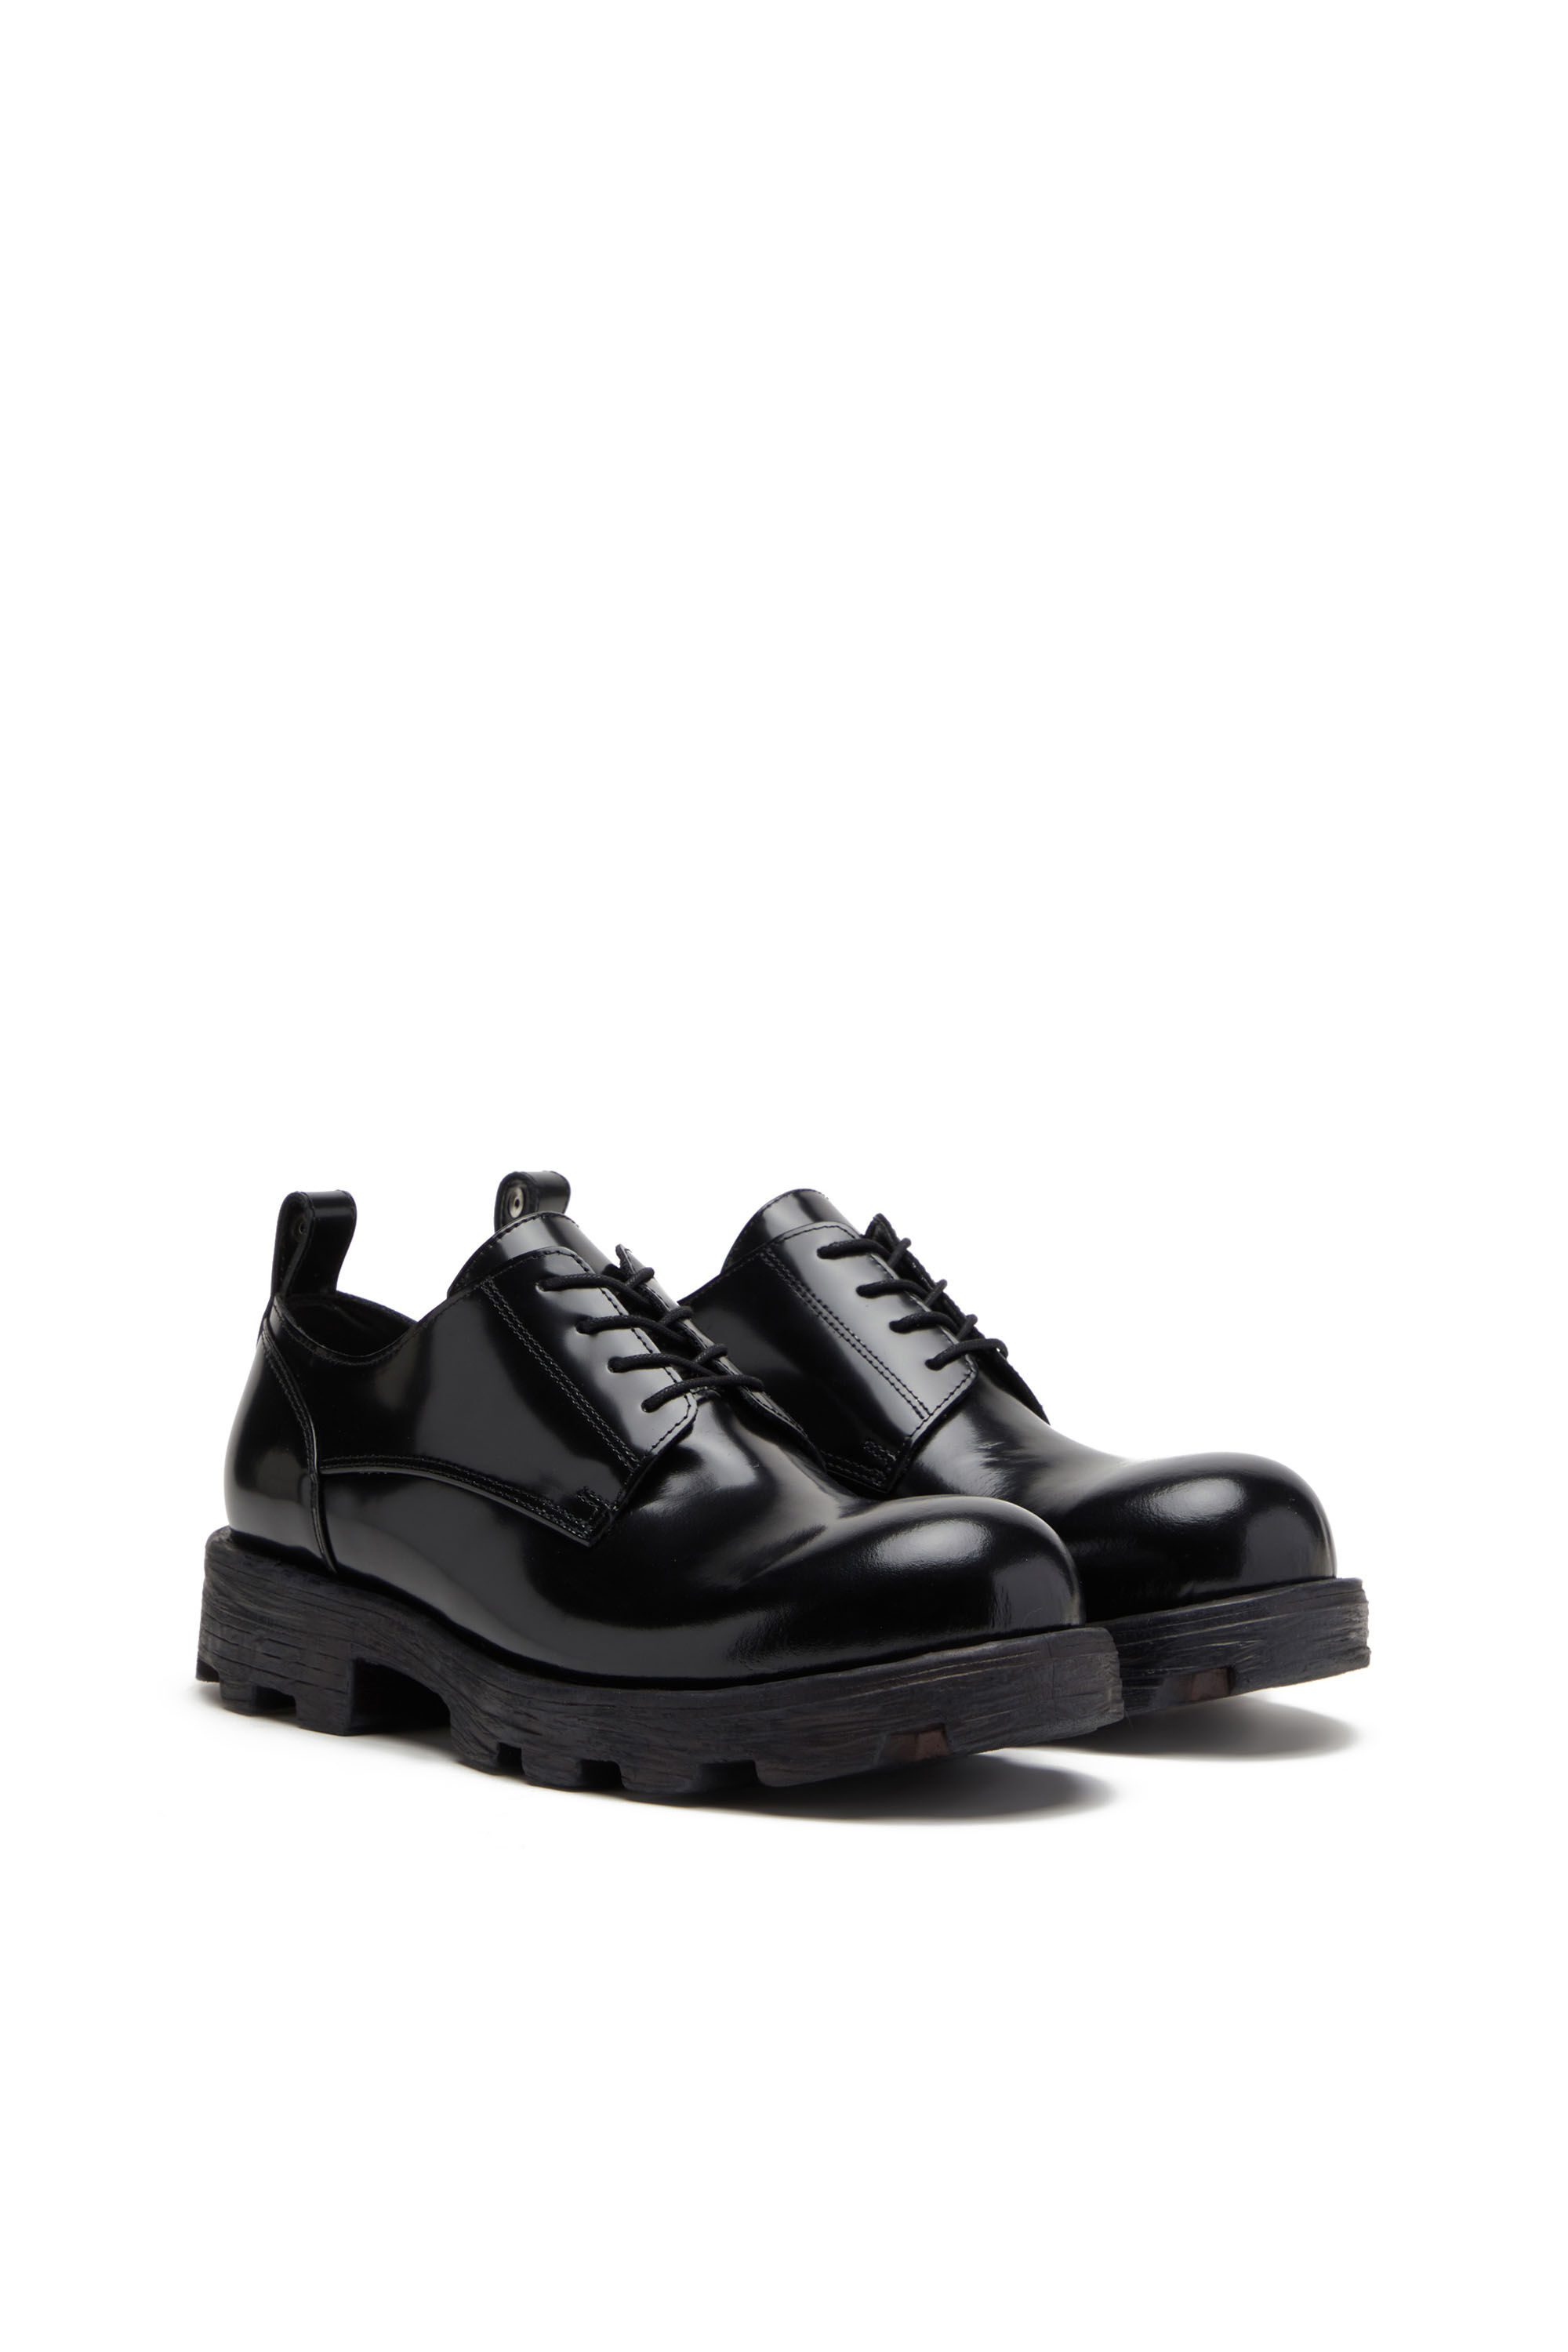 Diesel - D-HAMMER SH, Man D-Hammer SH - Lace-up shoes in shiny leather in Black - Image 2